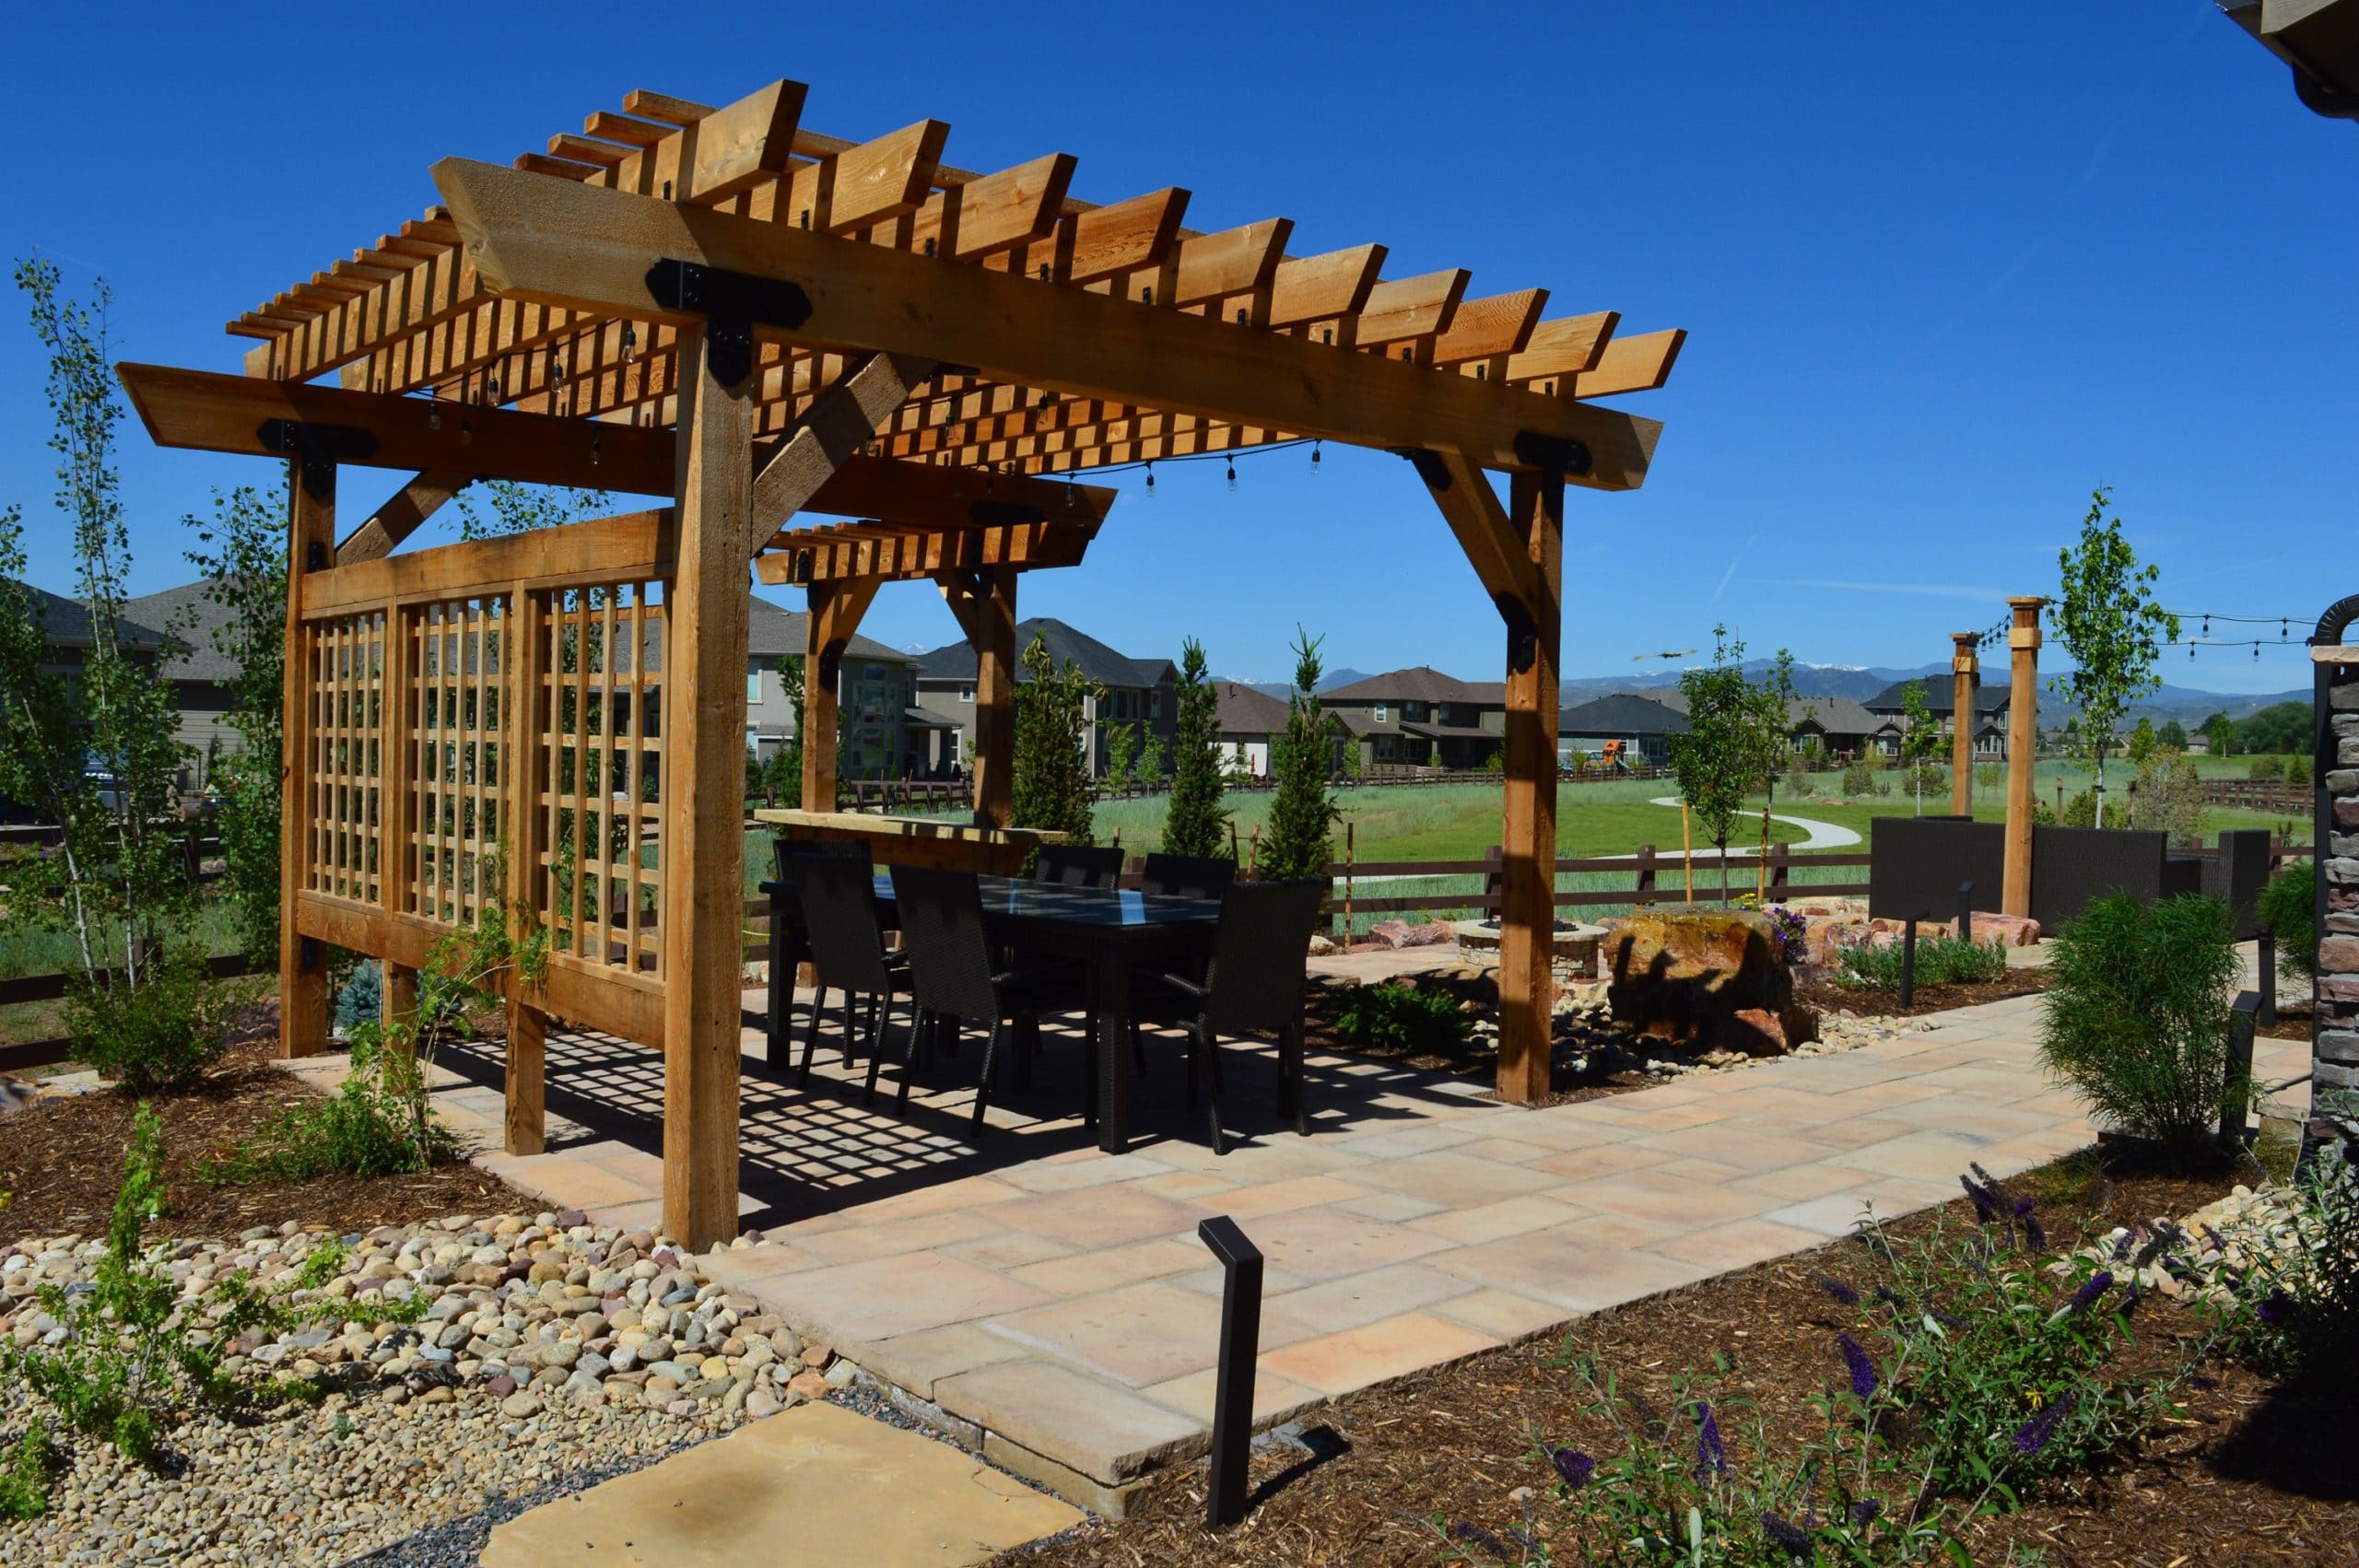 Pergola with dining area on top of brick laid patio surrounded by mulch and rocks with bushes and plants.